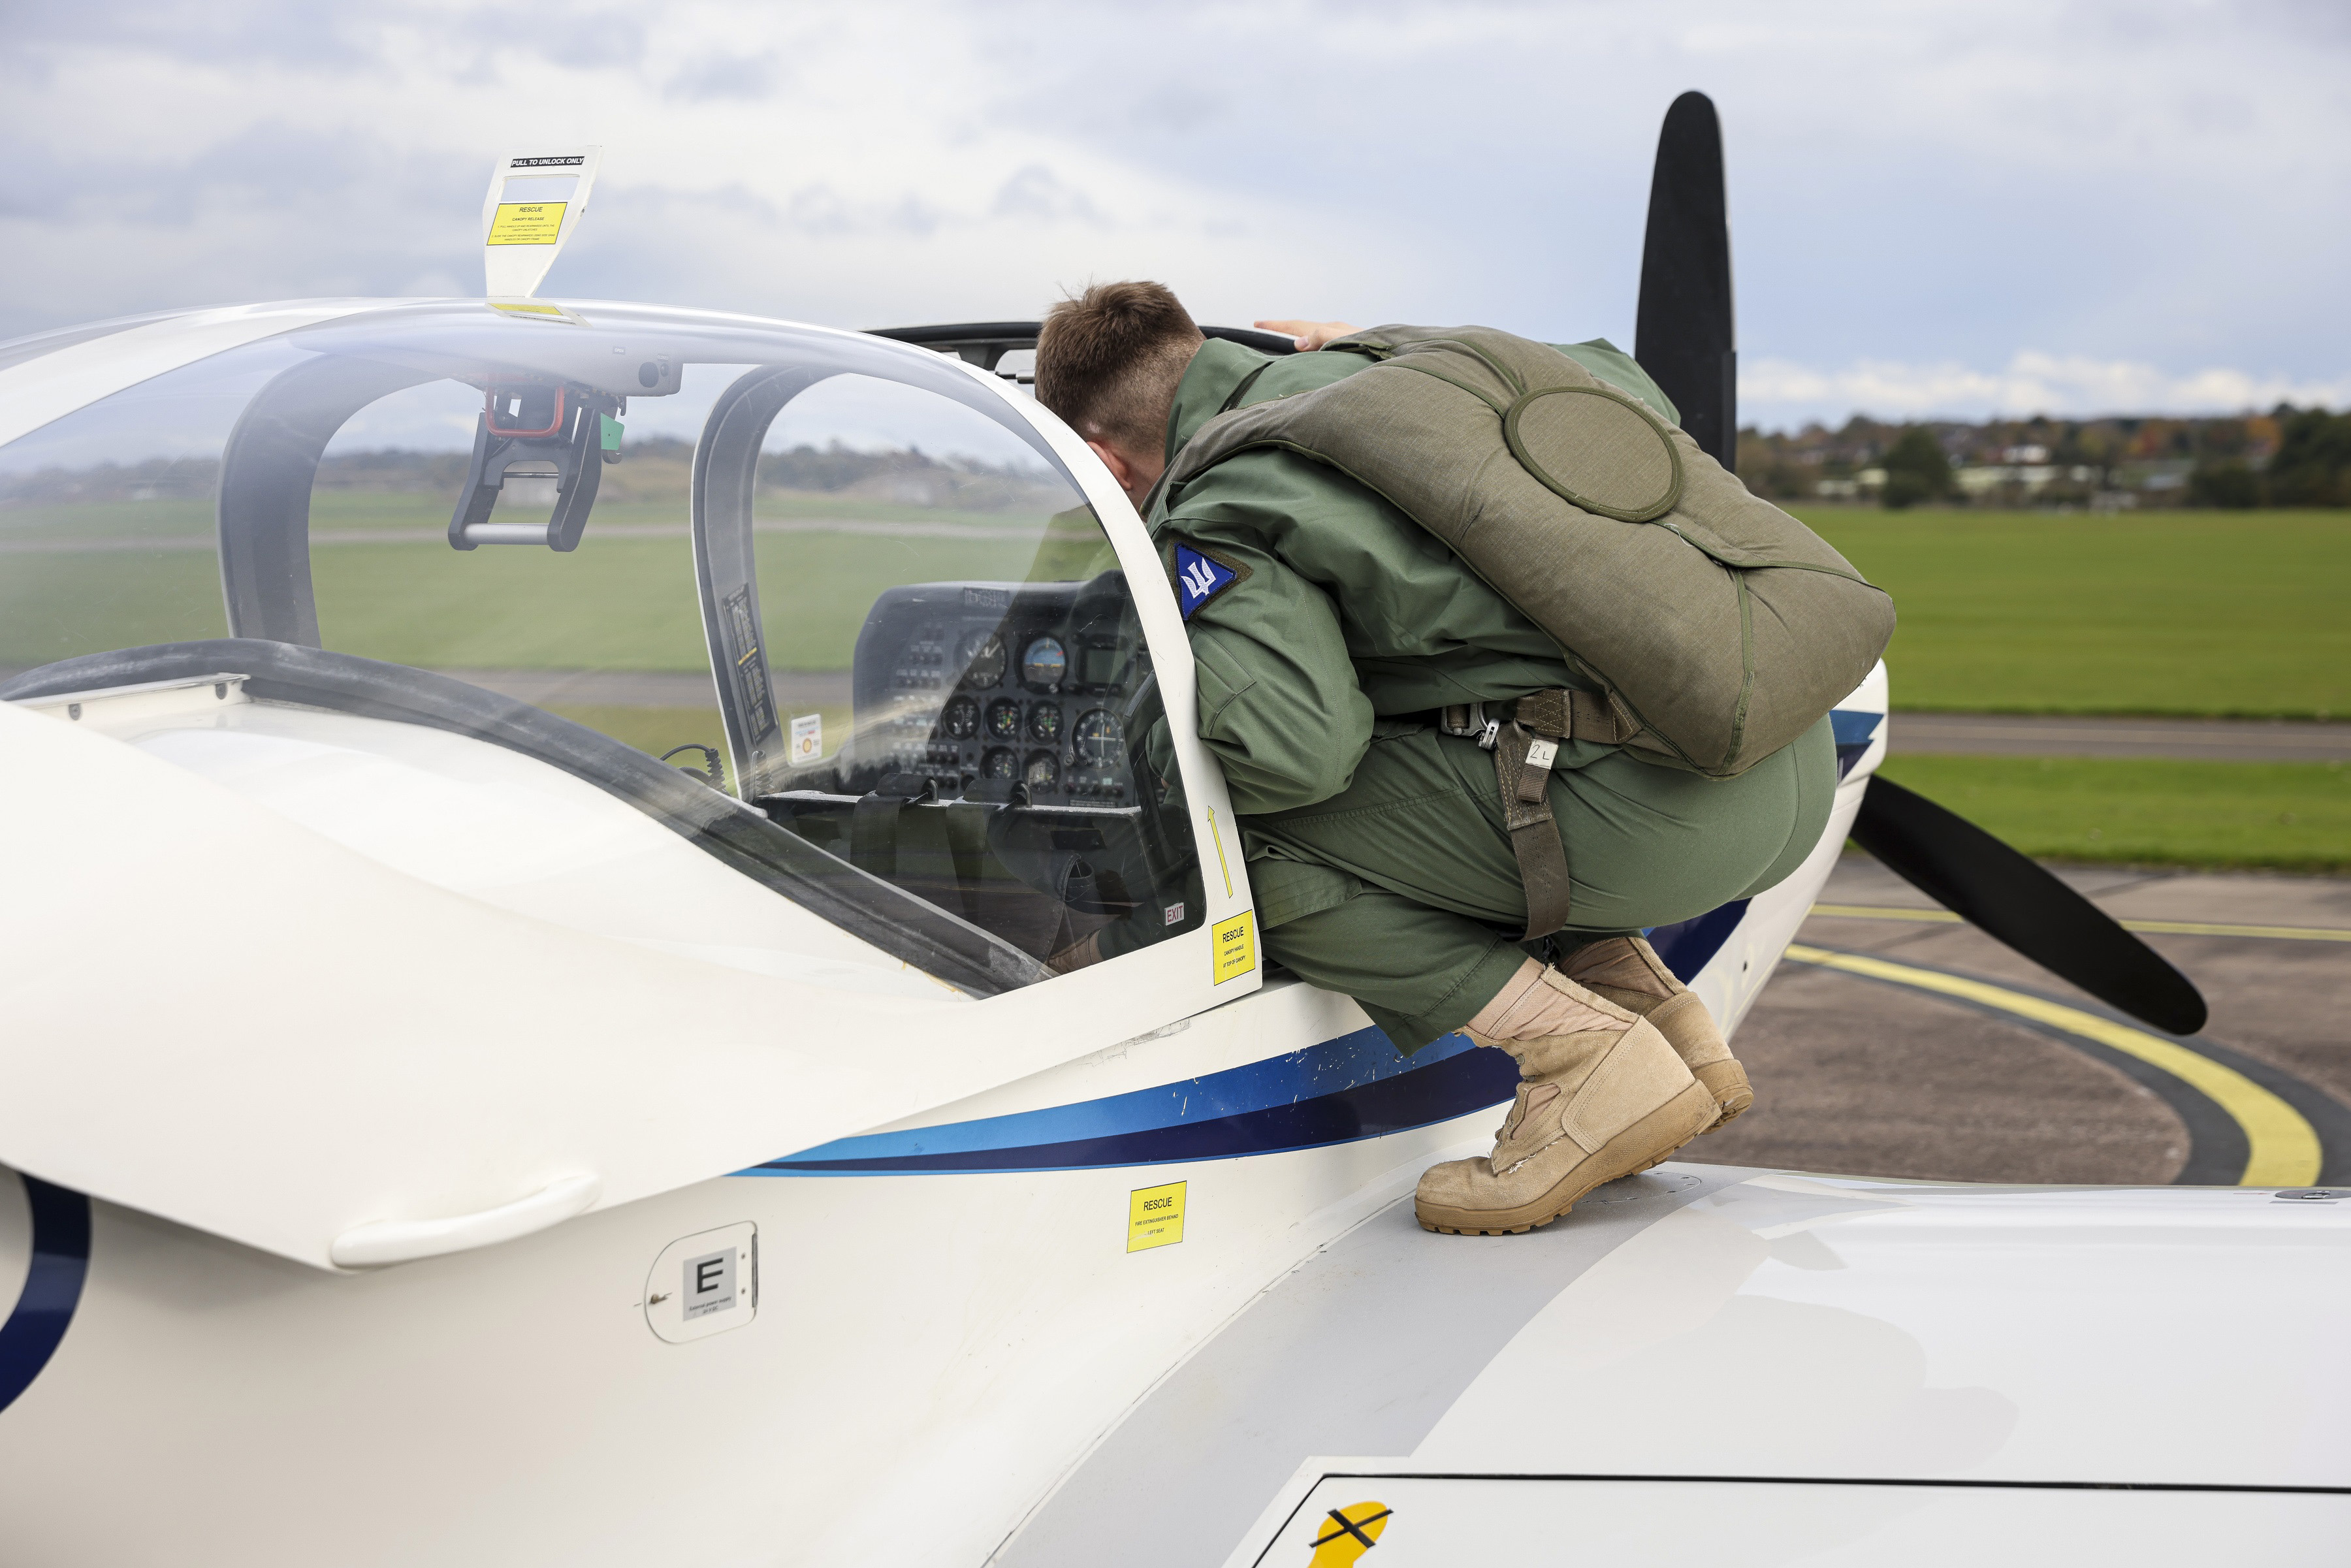 Pilot standing on tutor wing looking into the aircraft's cockpit